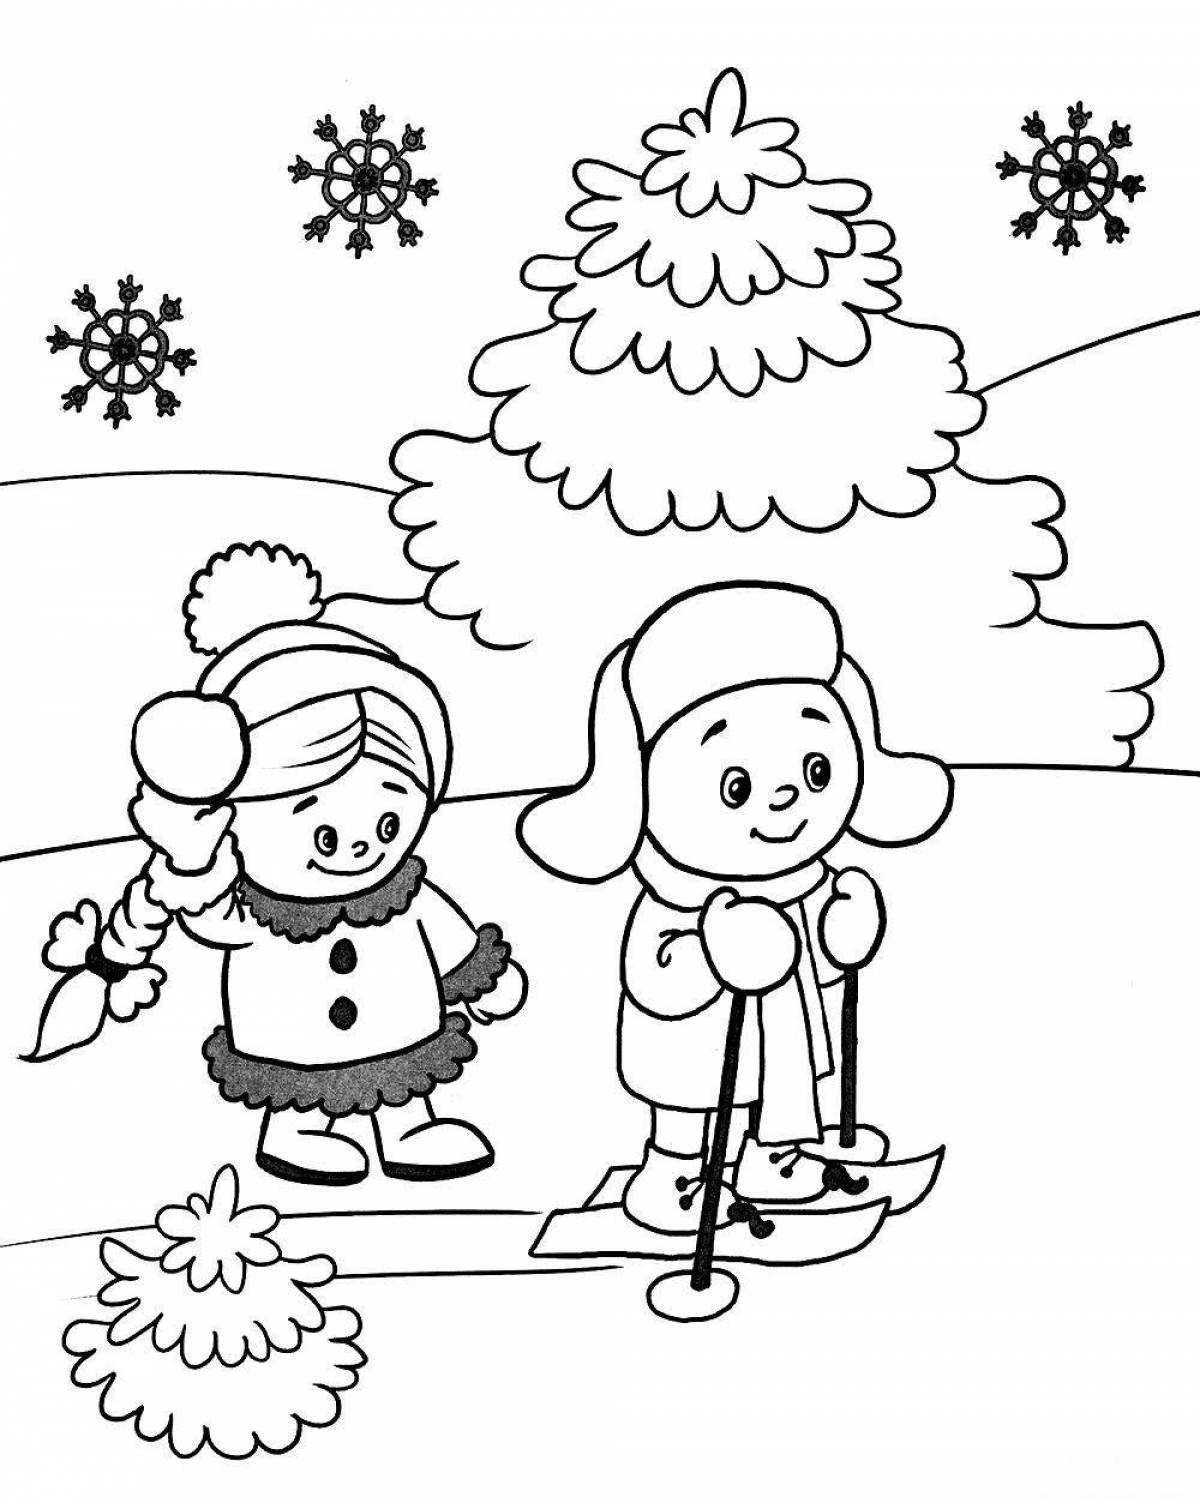 Violent winter coloring for children 2-3 years old